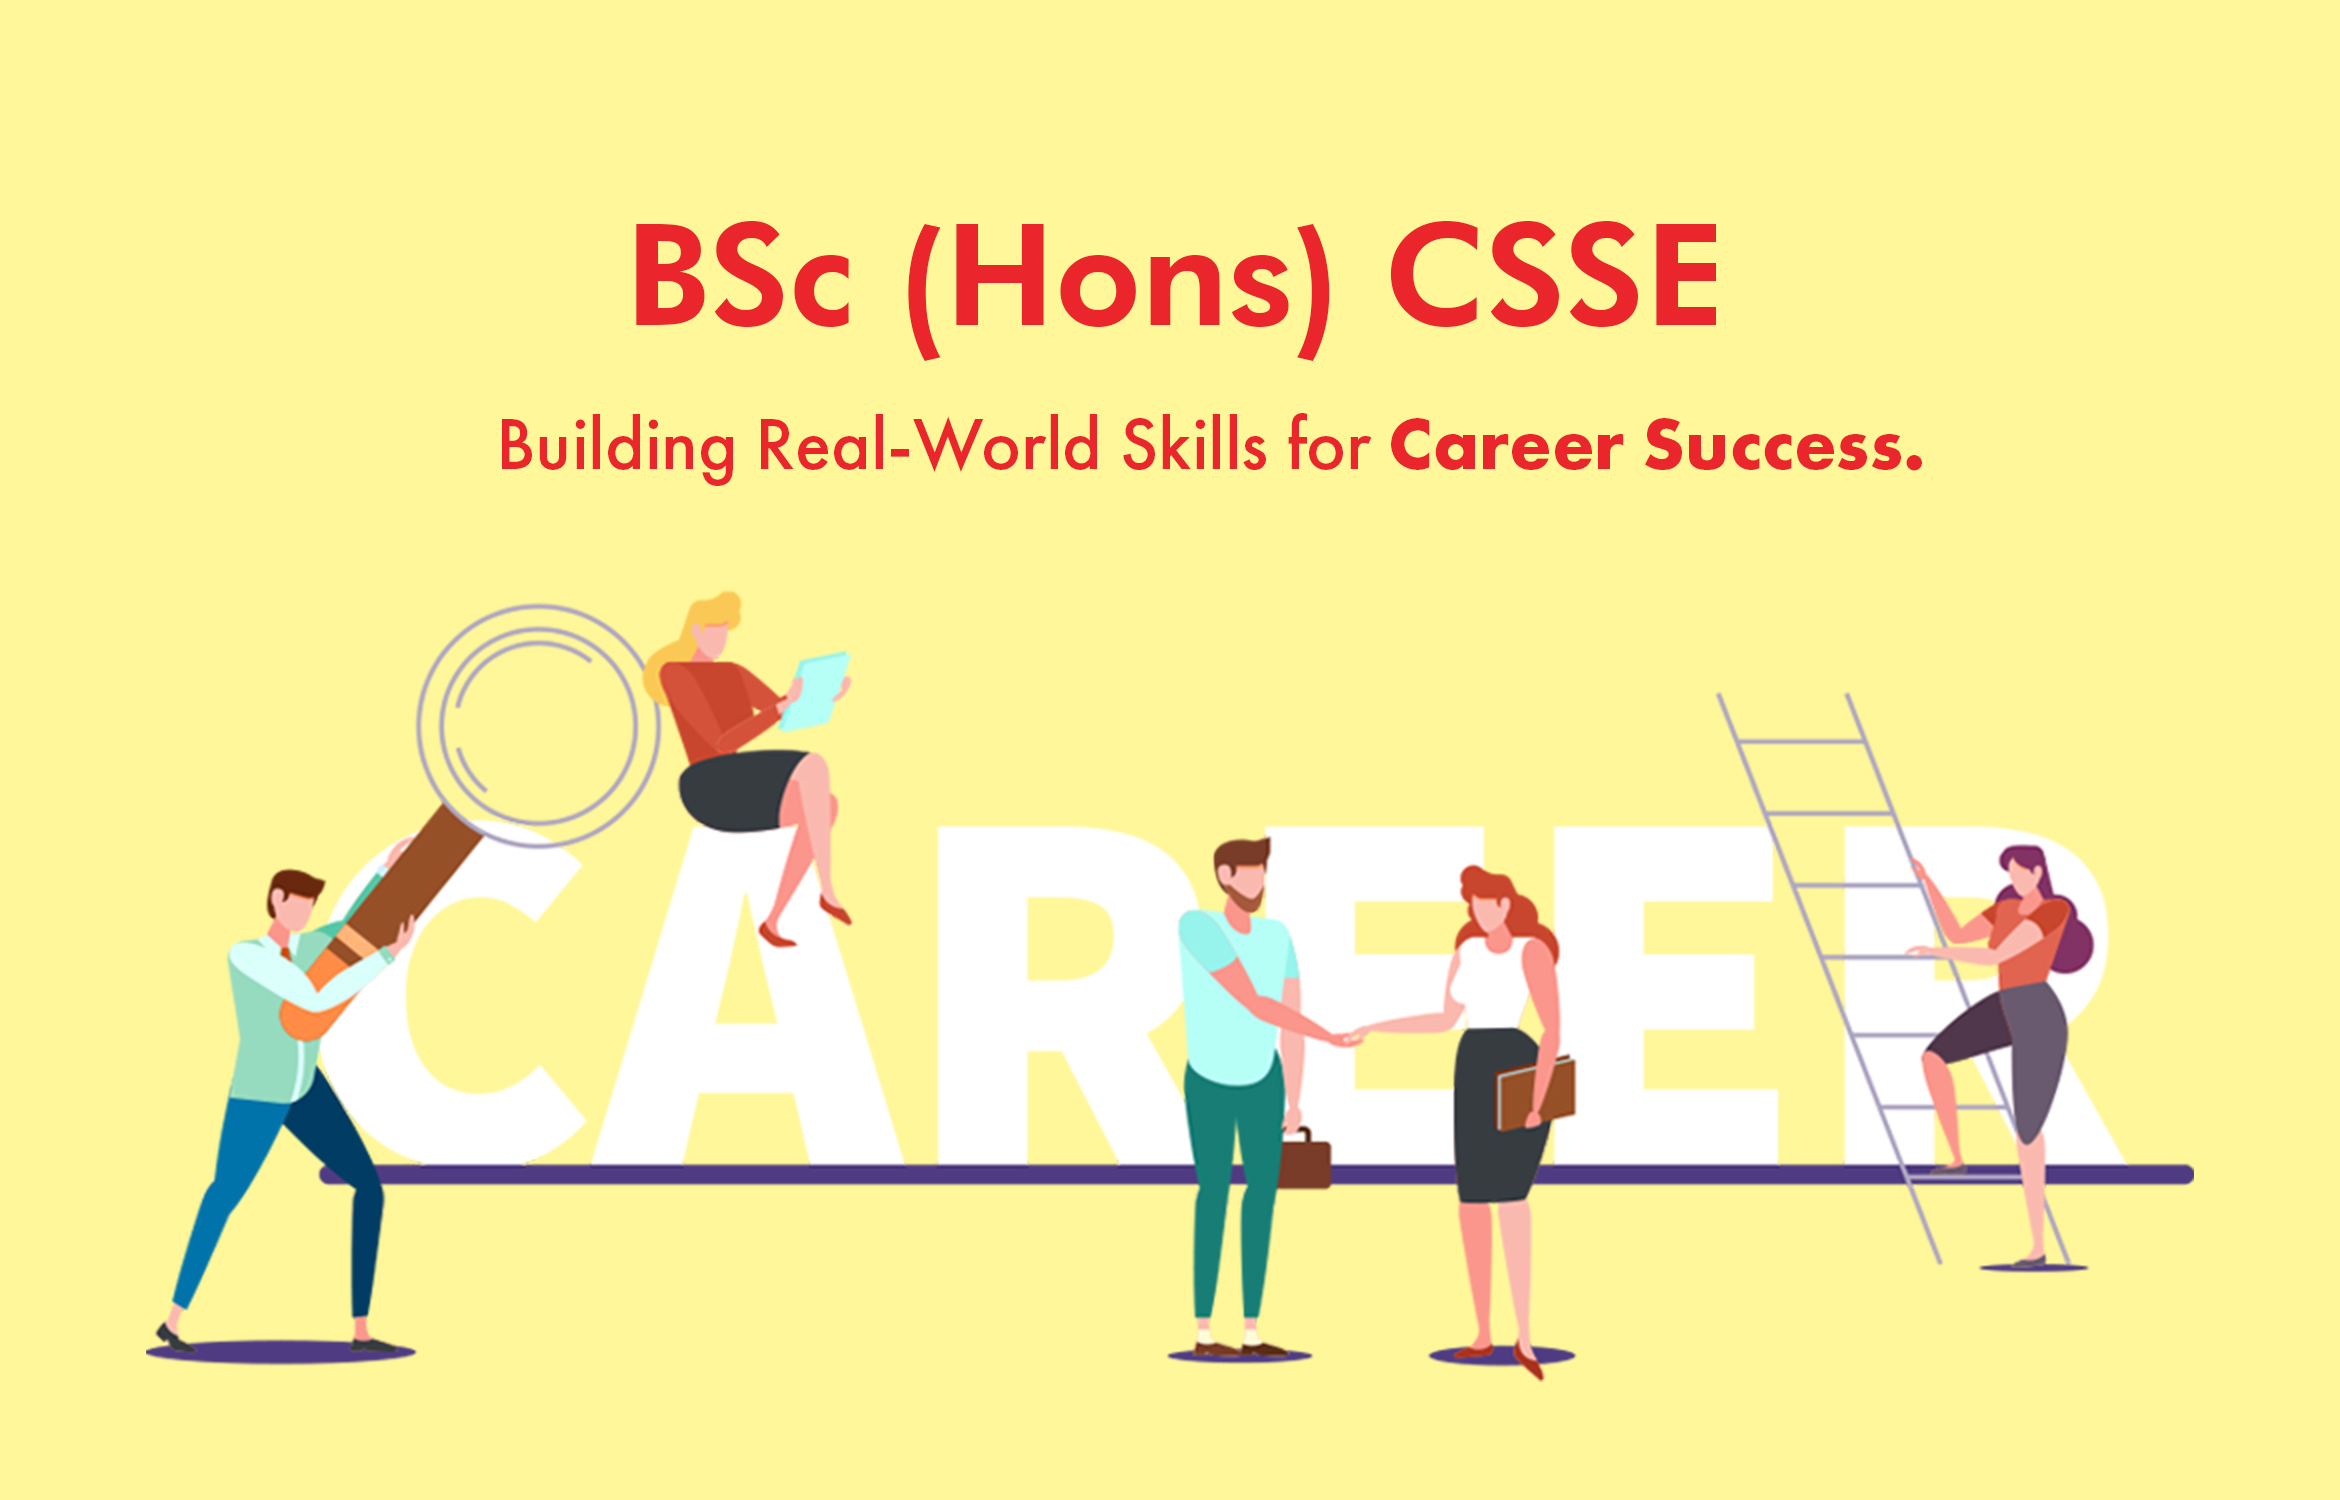 BSc (Hons) CSSE Building Real-World Skills for Career Success